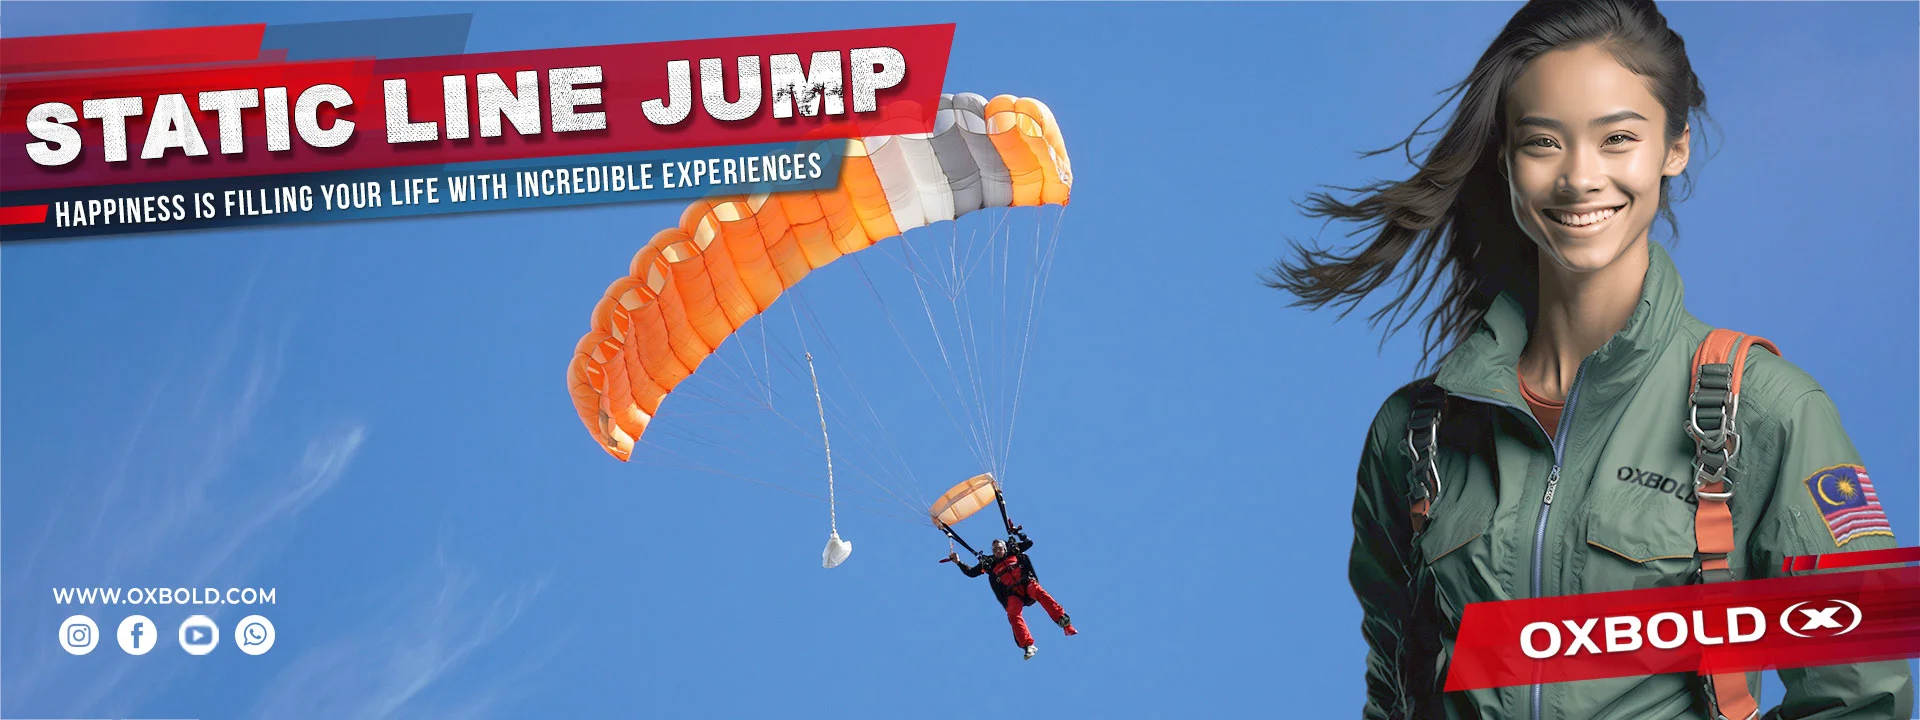 OXBOLD Static Line Jump Course on Vimeo